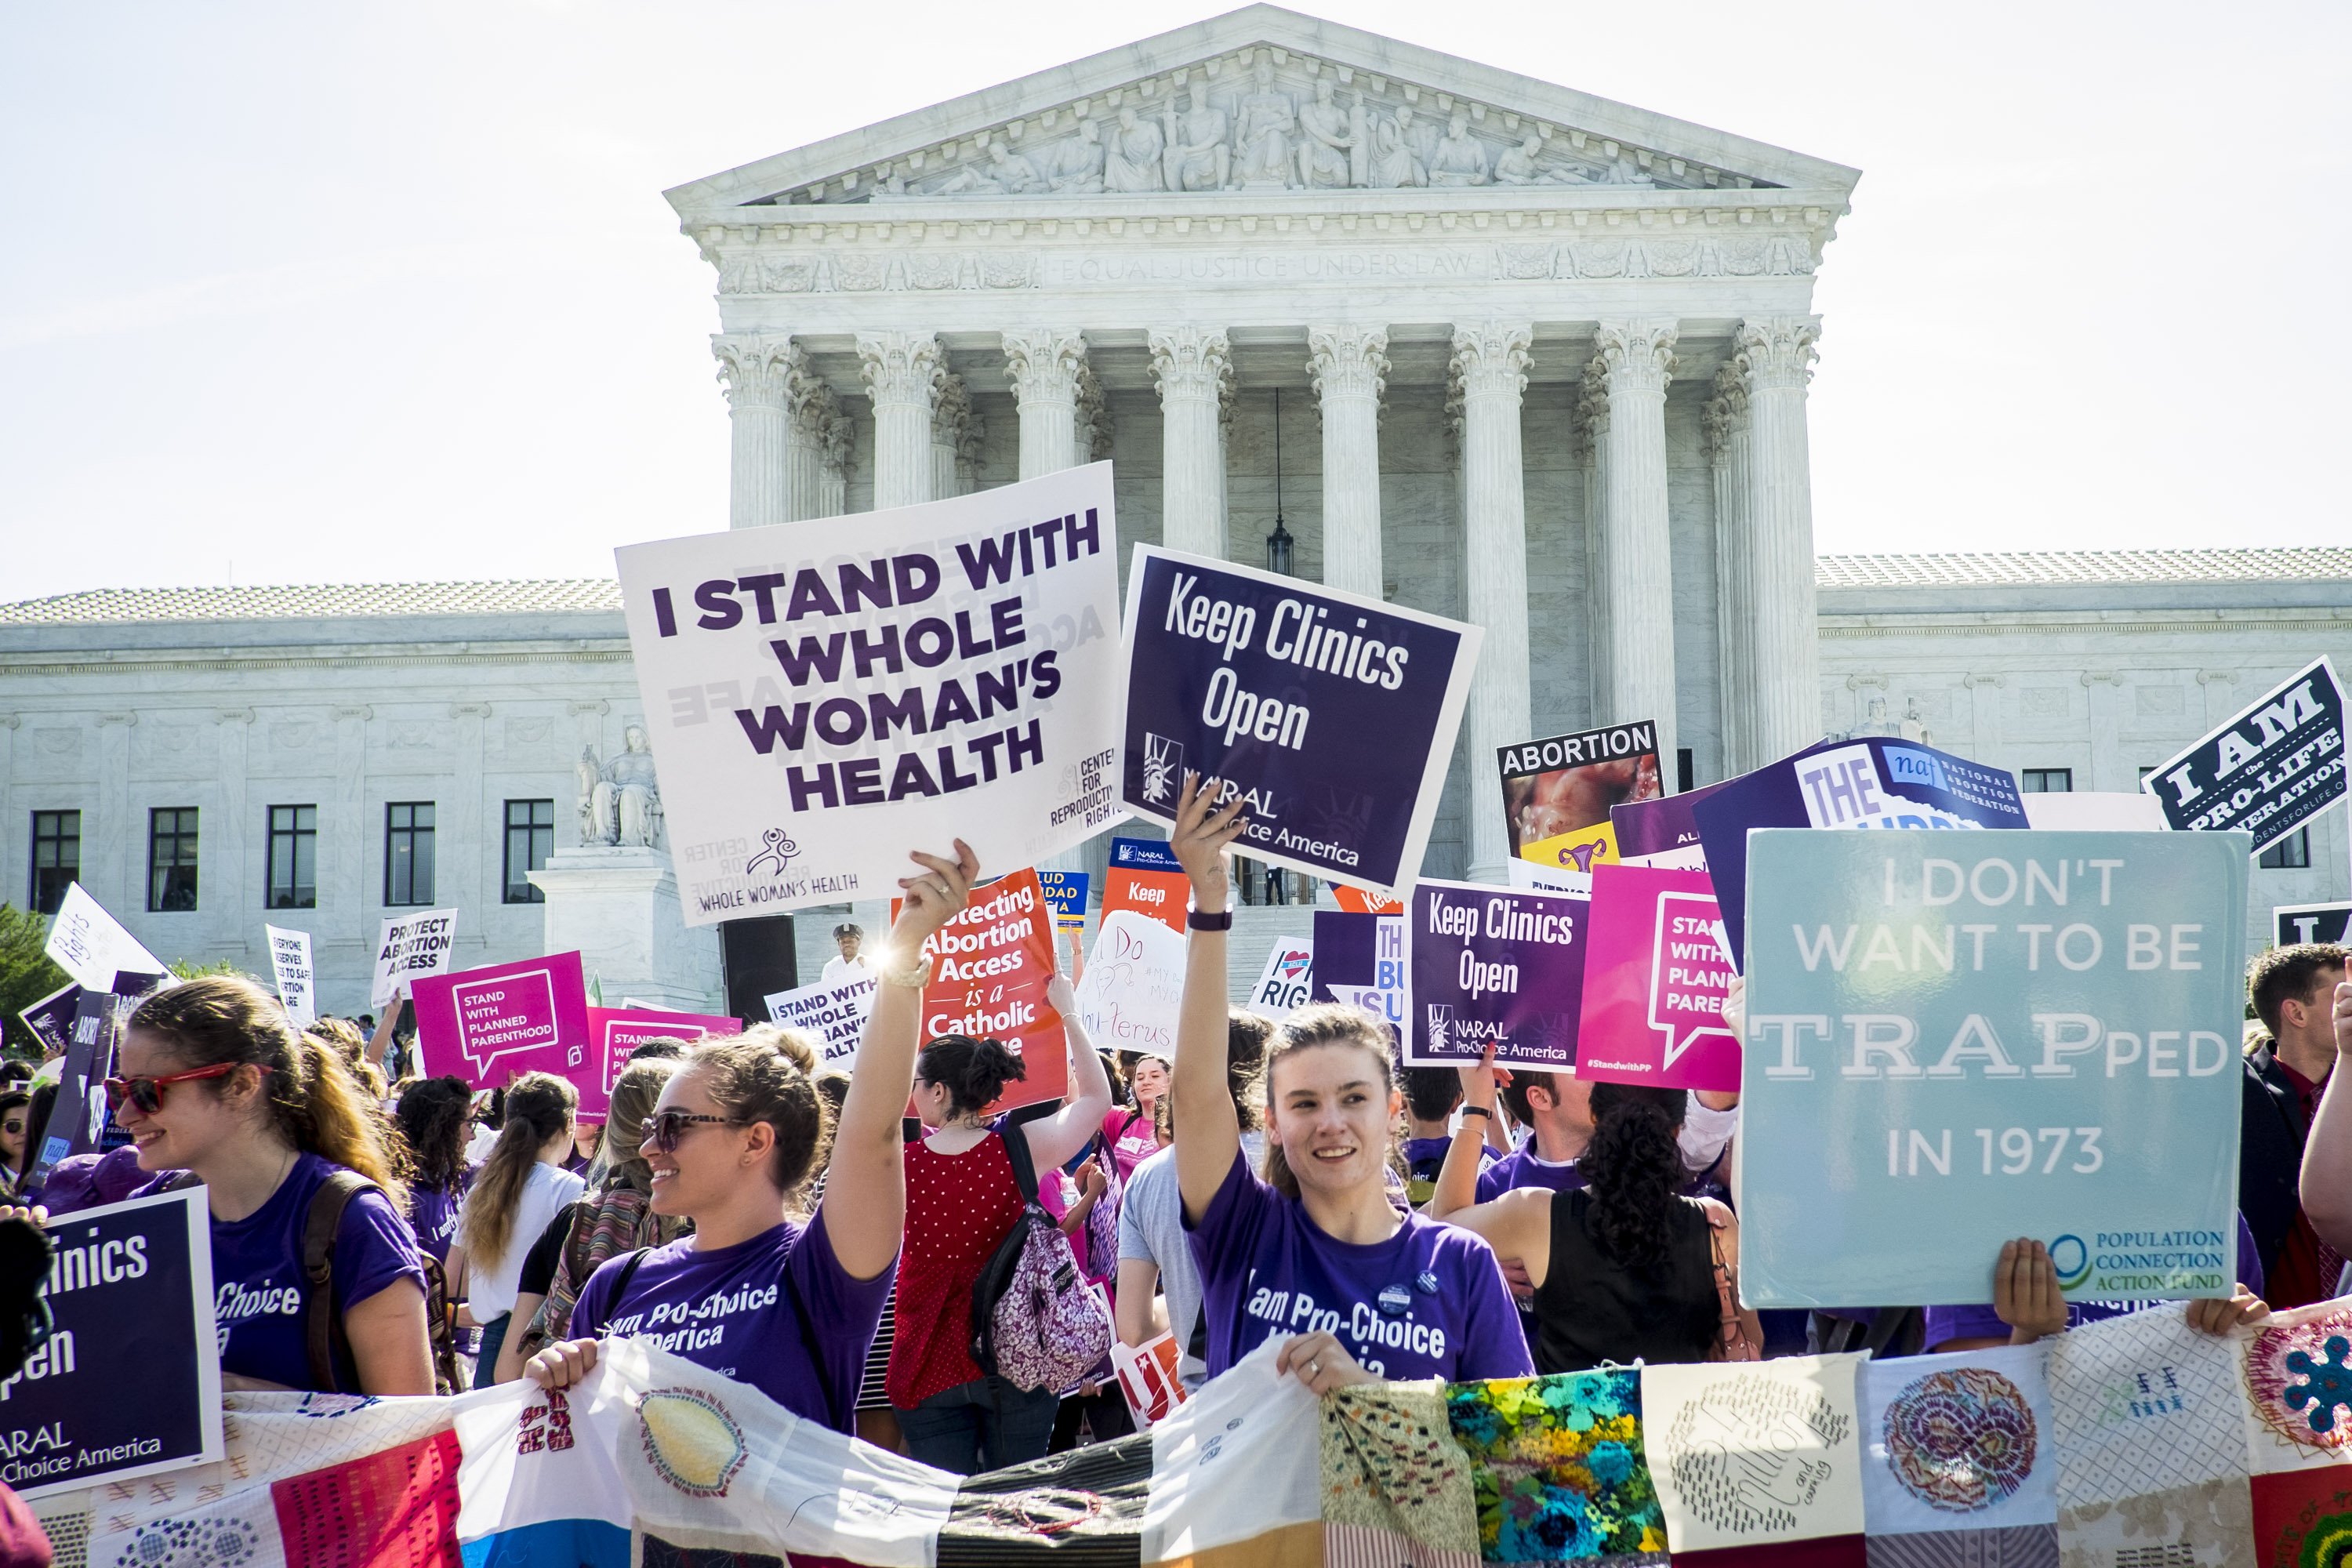 Abortion rights and anti-abortion activists demonstrate on the steps of the United States Supreme Court on June 27, 2016 in Washington, D.C. In a 5-3 decision, the U.S. Supreme Court struck down one of the nation's toughest restrictions on abortion, a Texas law that women's groups said would have forced more than three-quarters of the state's clinics to close. (Pete Marovich—Getty Images)